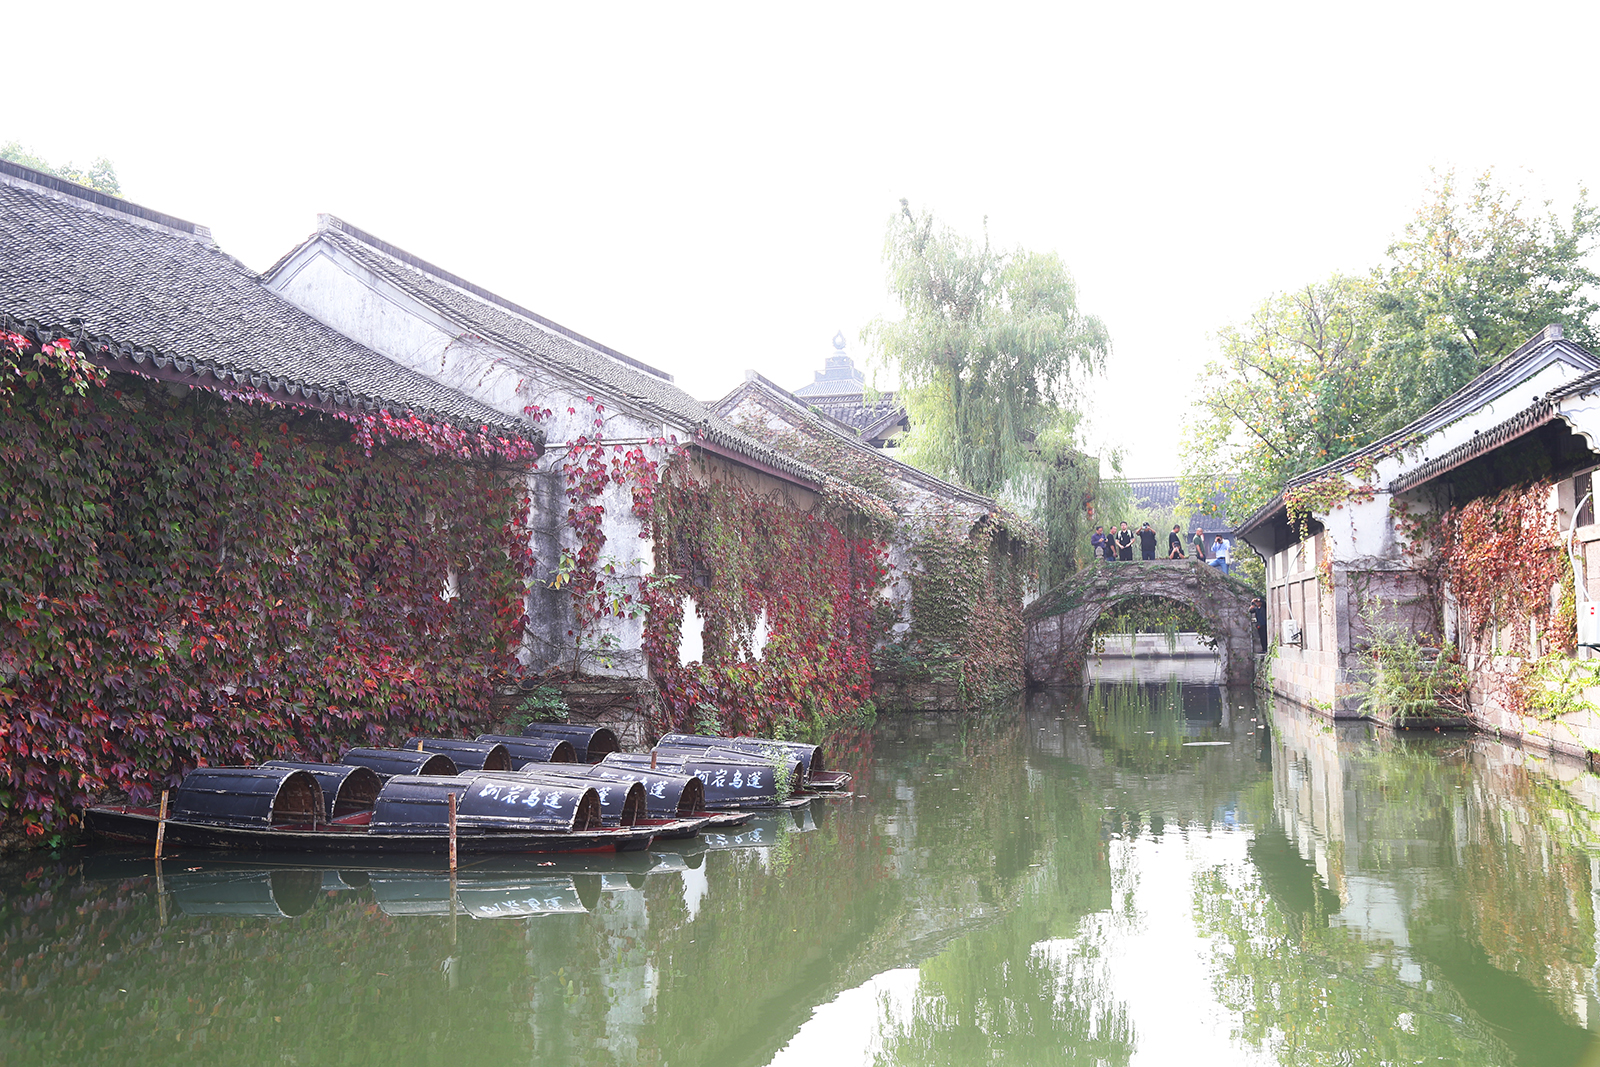 A view of Luzhen featuring traditional black-and-white residences, arched stone bridges and traditional black-topped boats in Shaoxing, Zhejiang Province /CGTN